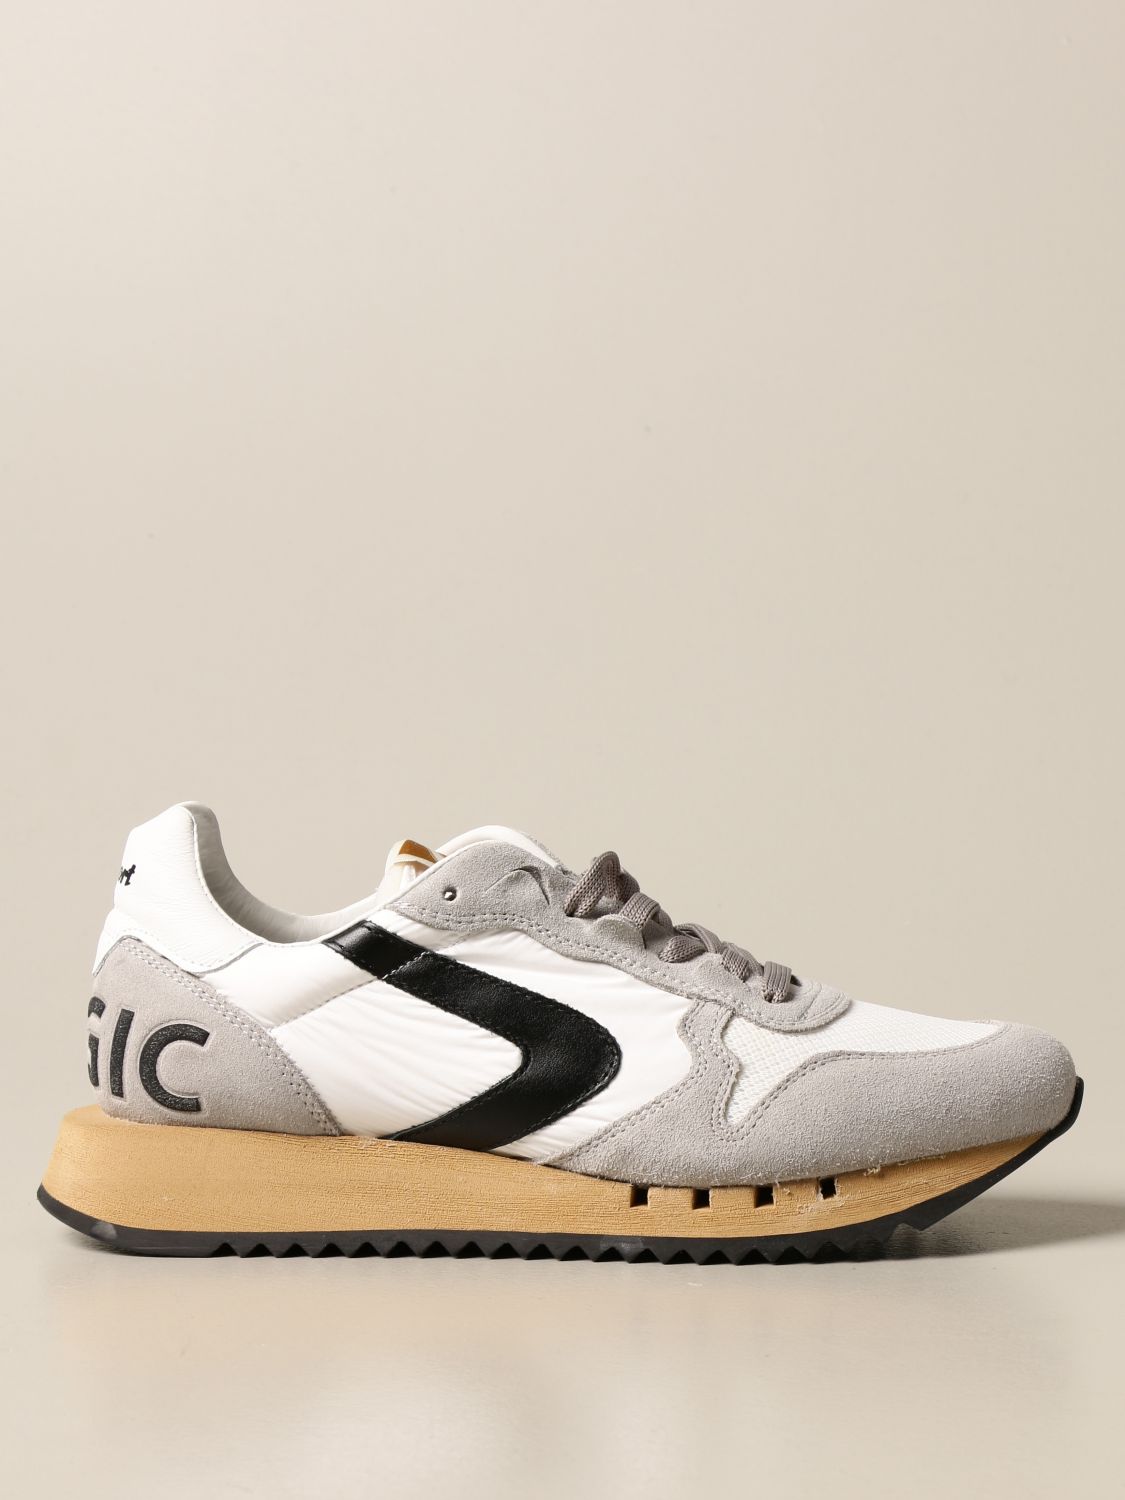 VALSPORT: Magic sneakers in suede and nylon - White | Valsport sneakers ...